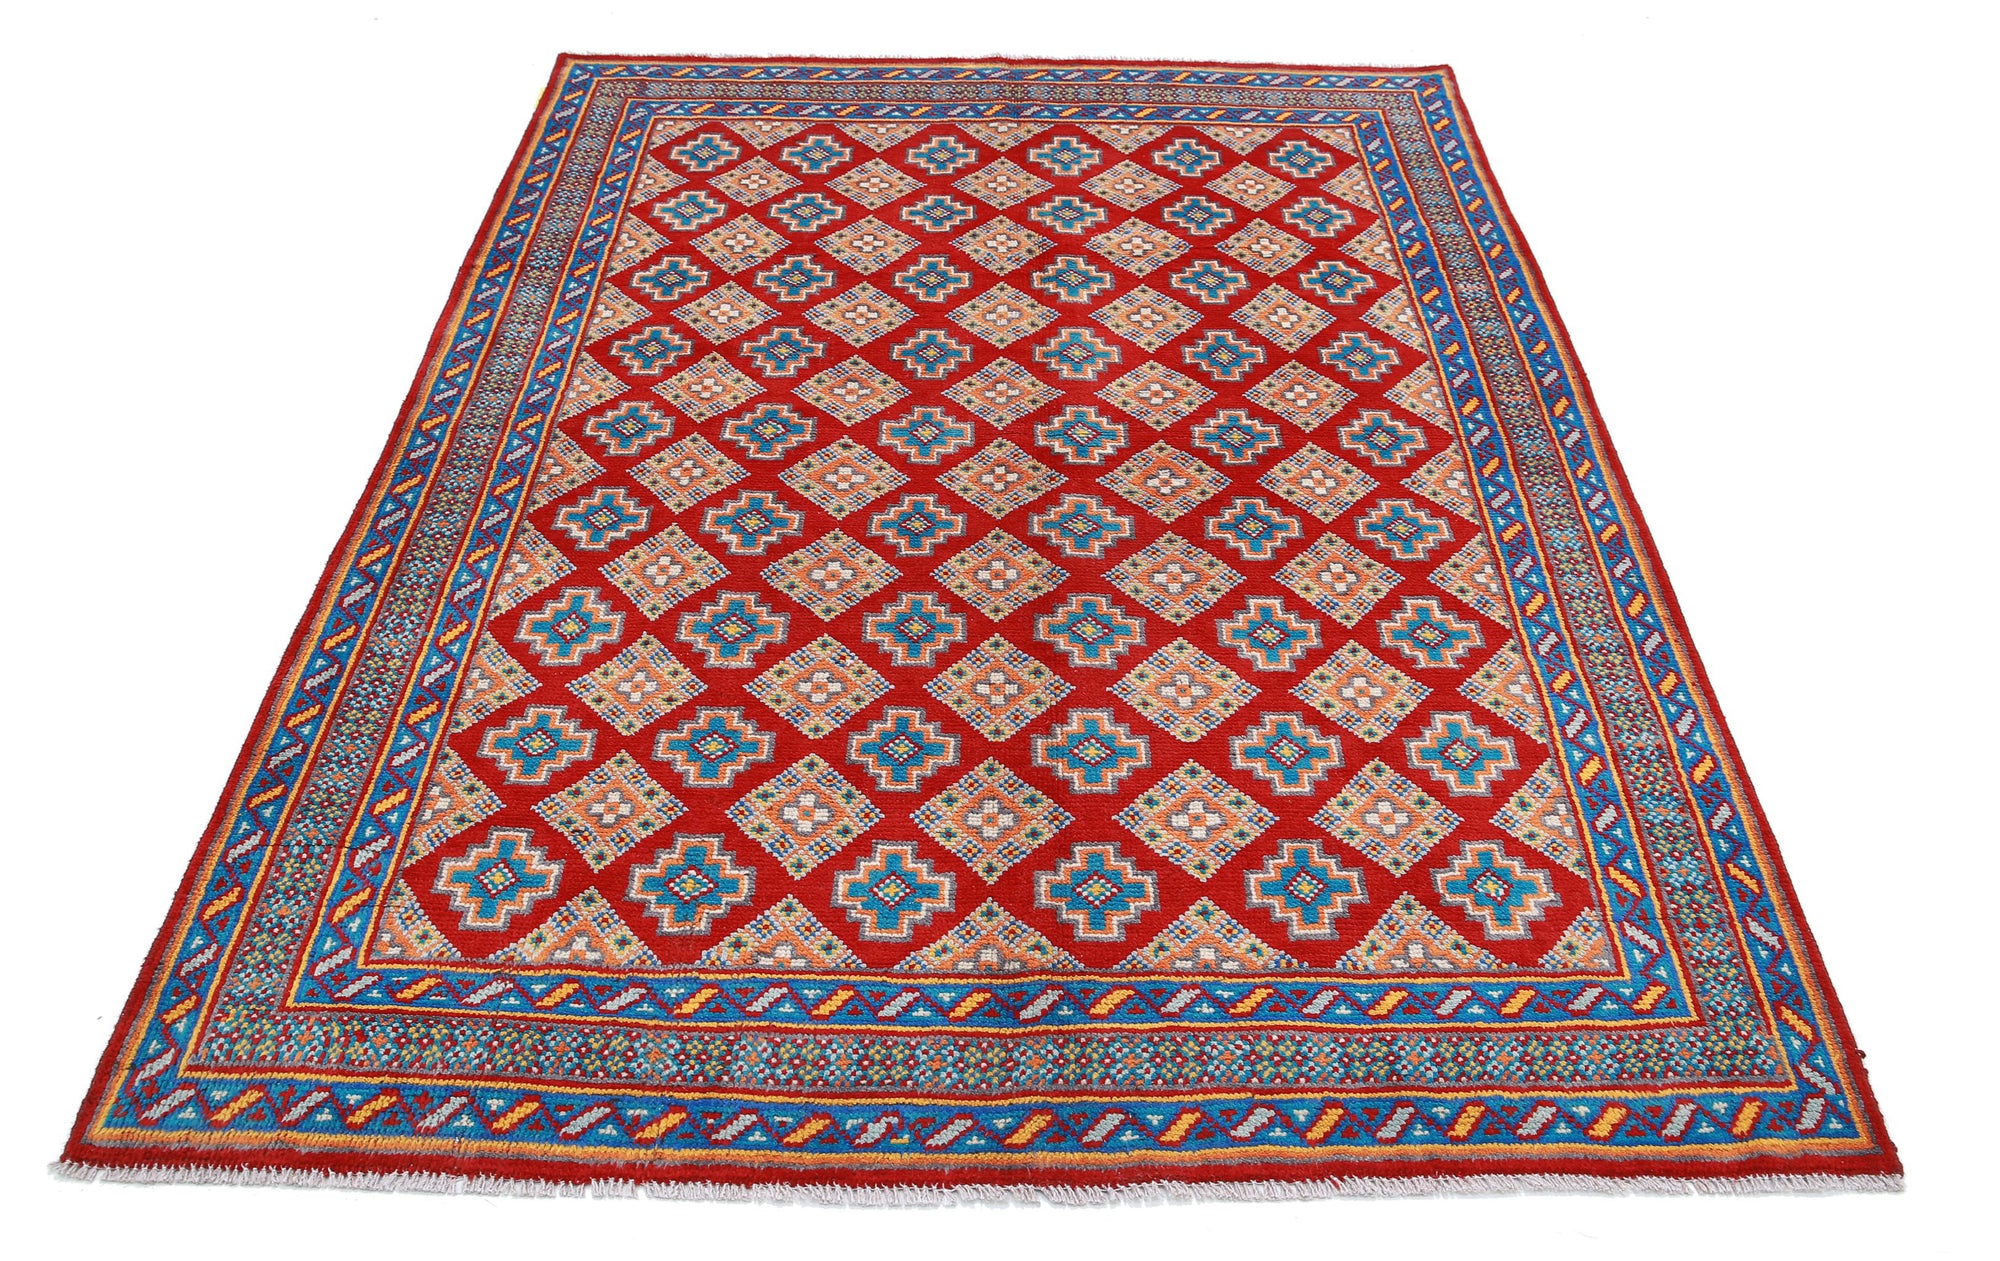 Revival-hand-knotted-qarghani-wool-rug-5013455-3.jpg